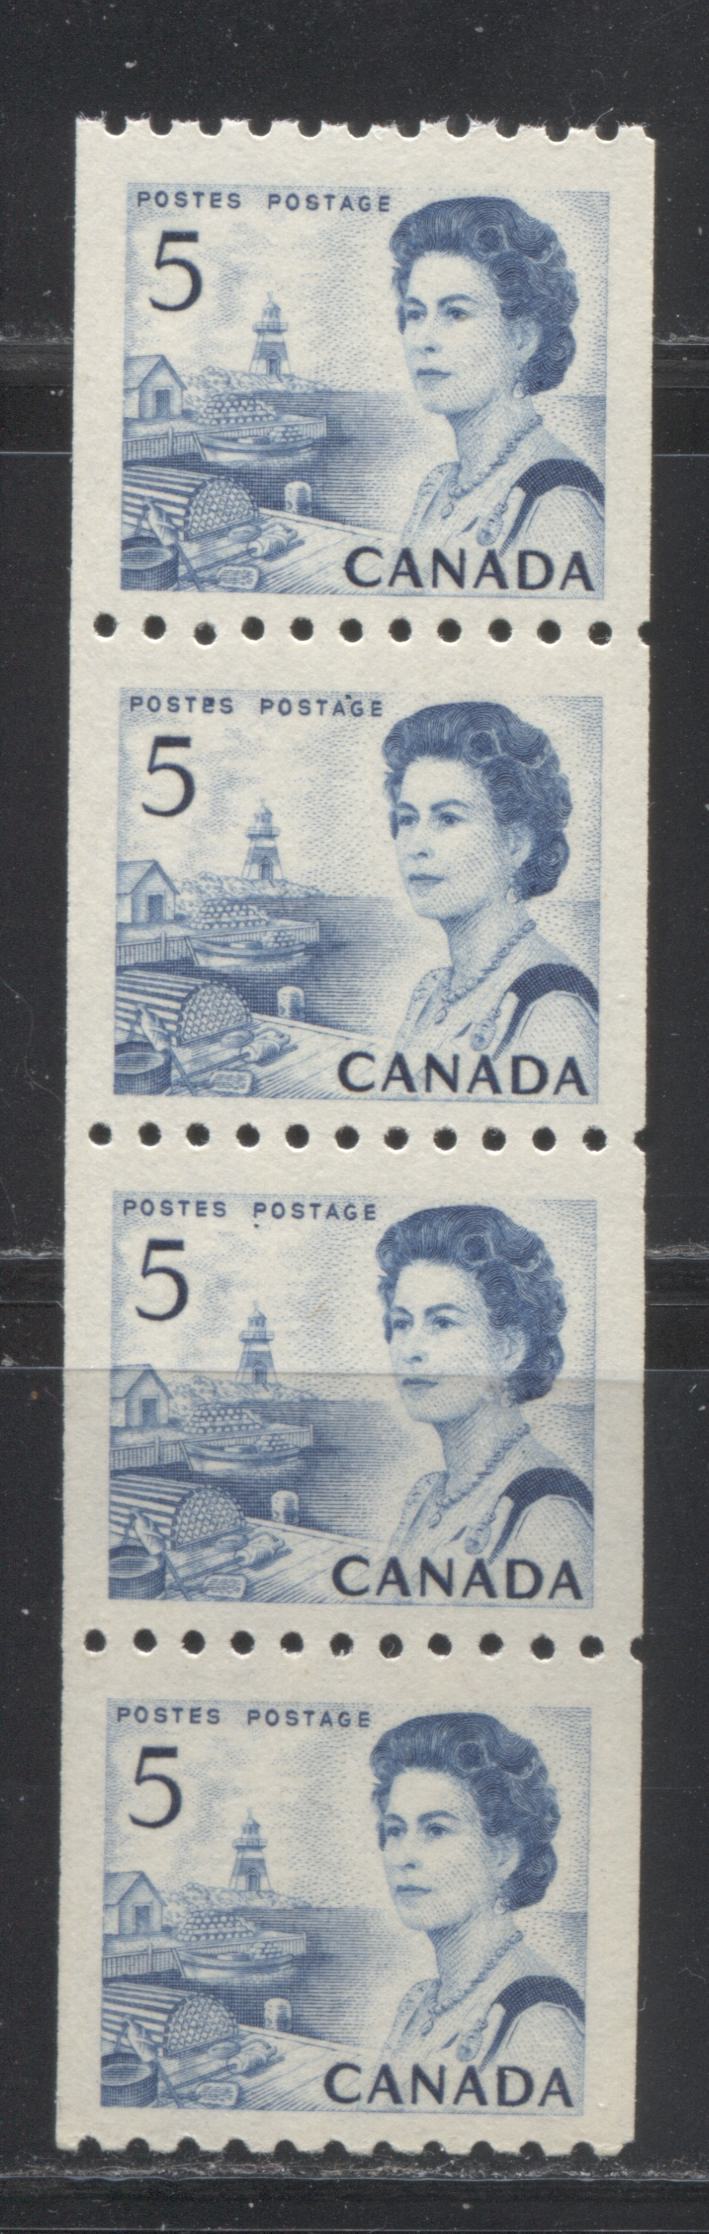 Lot 237 Canada #468i 5c Blue Fishing Village, 1967-1973 Centennial Definitive Issue, A VFNH Coil Strip, LF-fl Greyish, Vertical Wove, Smooth Glossy Dex, Showing Dot Between AG of Postage and Below P